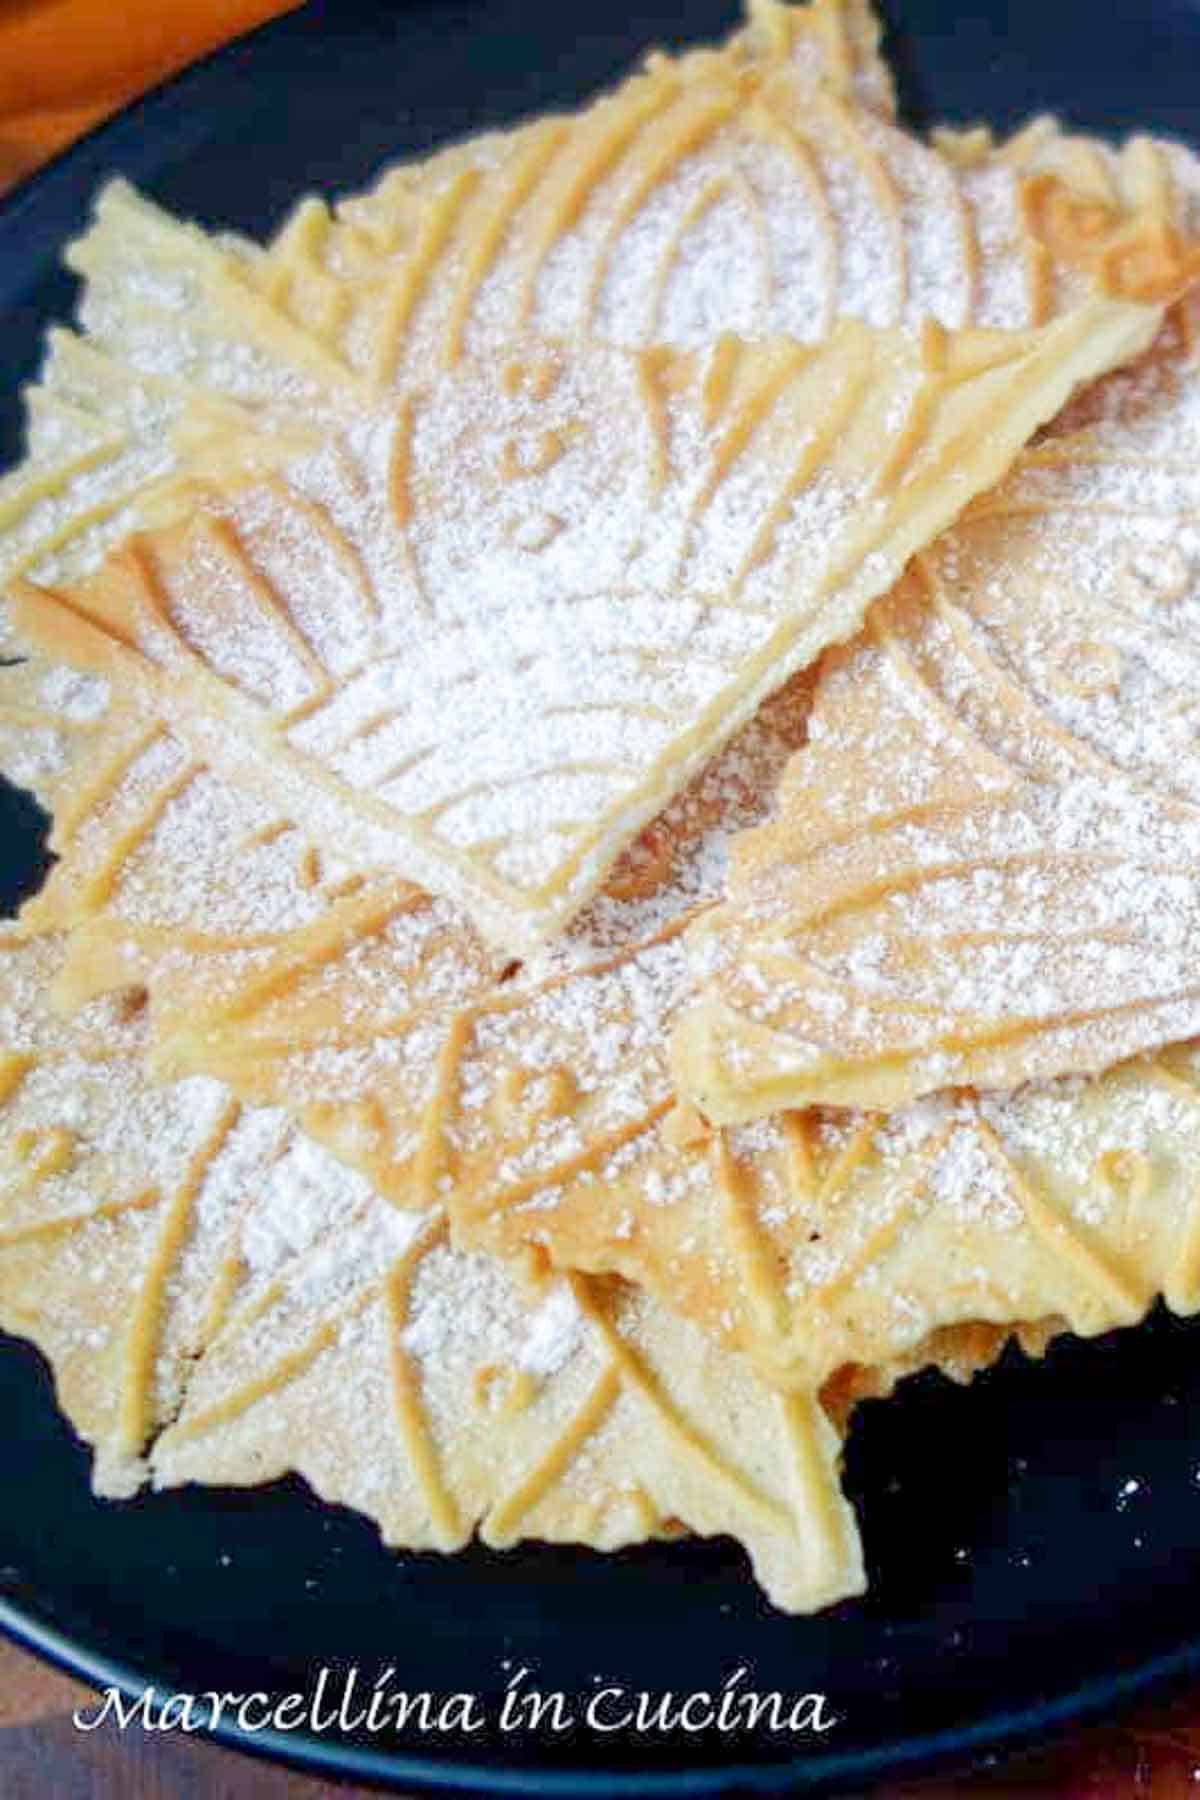 Lemon pizzelle dusted with powdered sugar on a black plate.